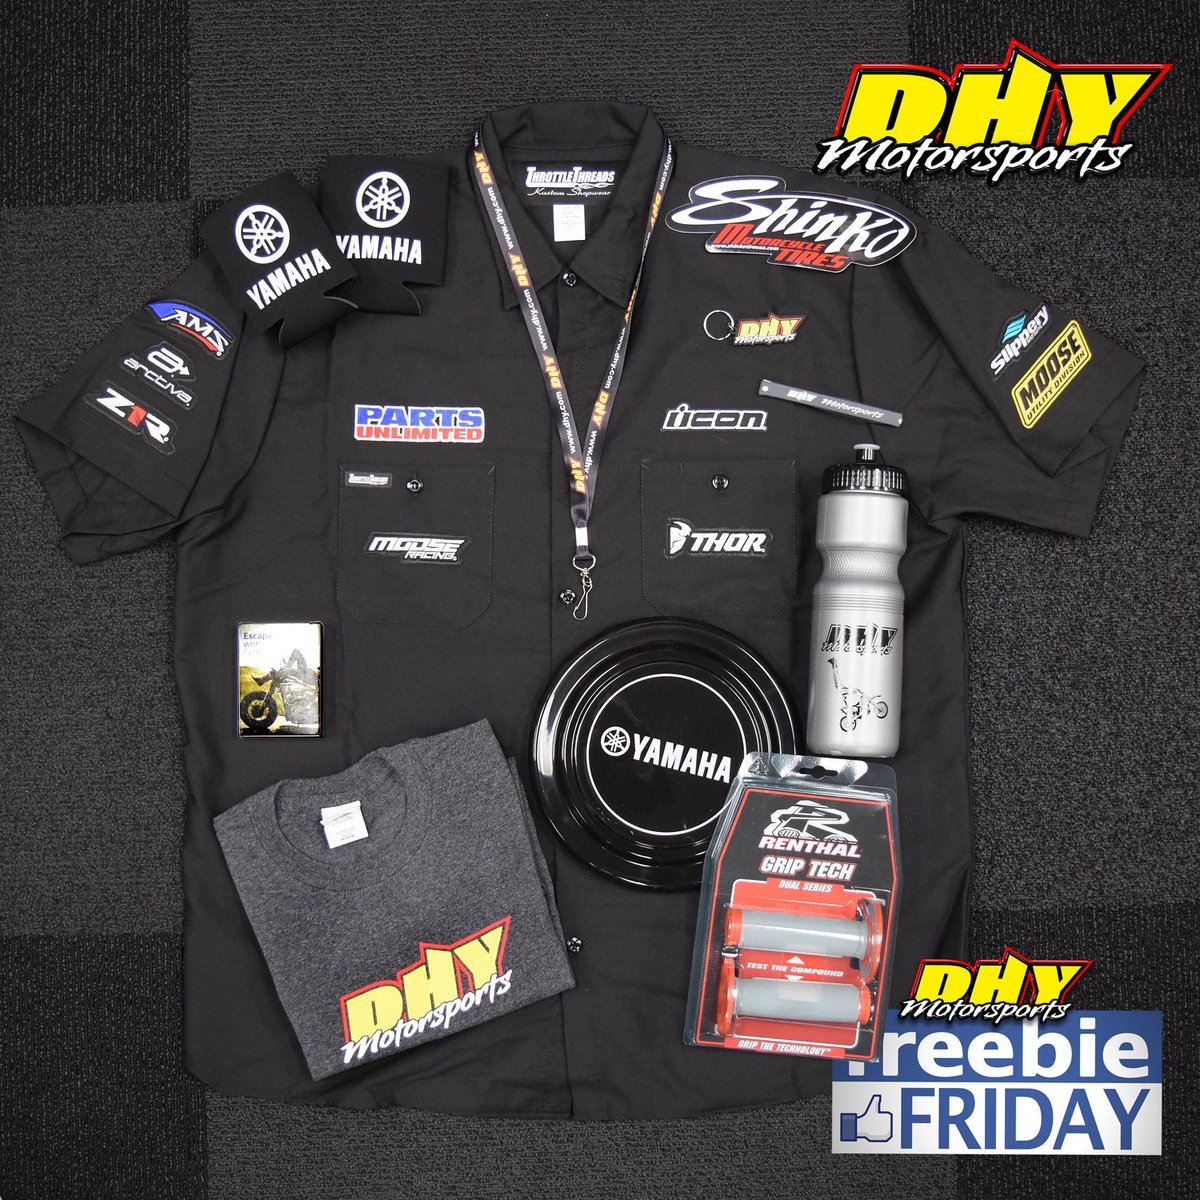 It may not seem like it, but today is #FreebieFriday! This week we're featuring this #PartsUnlimited work shirt, #Yamaha koozies and frizbie, #Renthal grips, #Progressive cards, and the #DHYMotorsports #Swagbag! Each click, comment, and share gets your an entry. Get clicking!